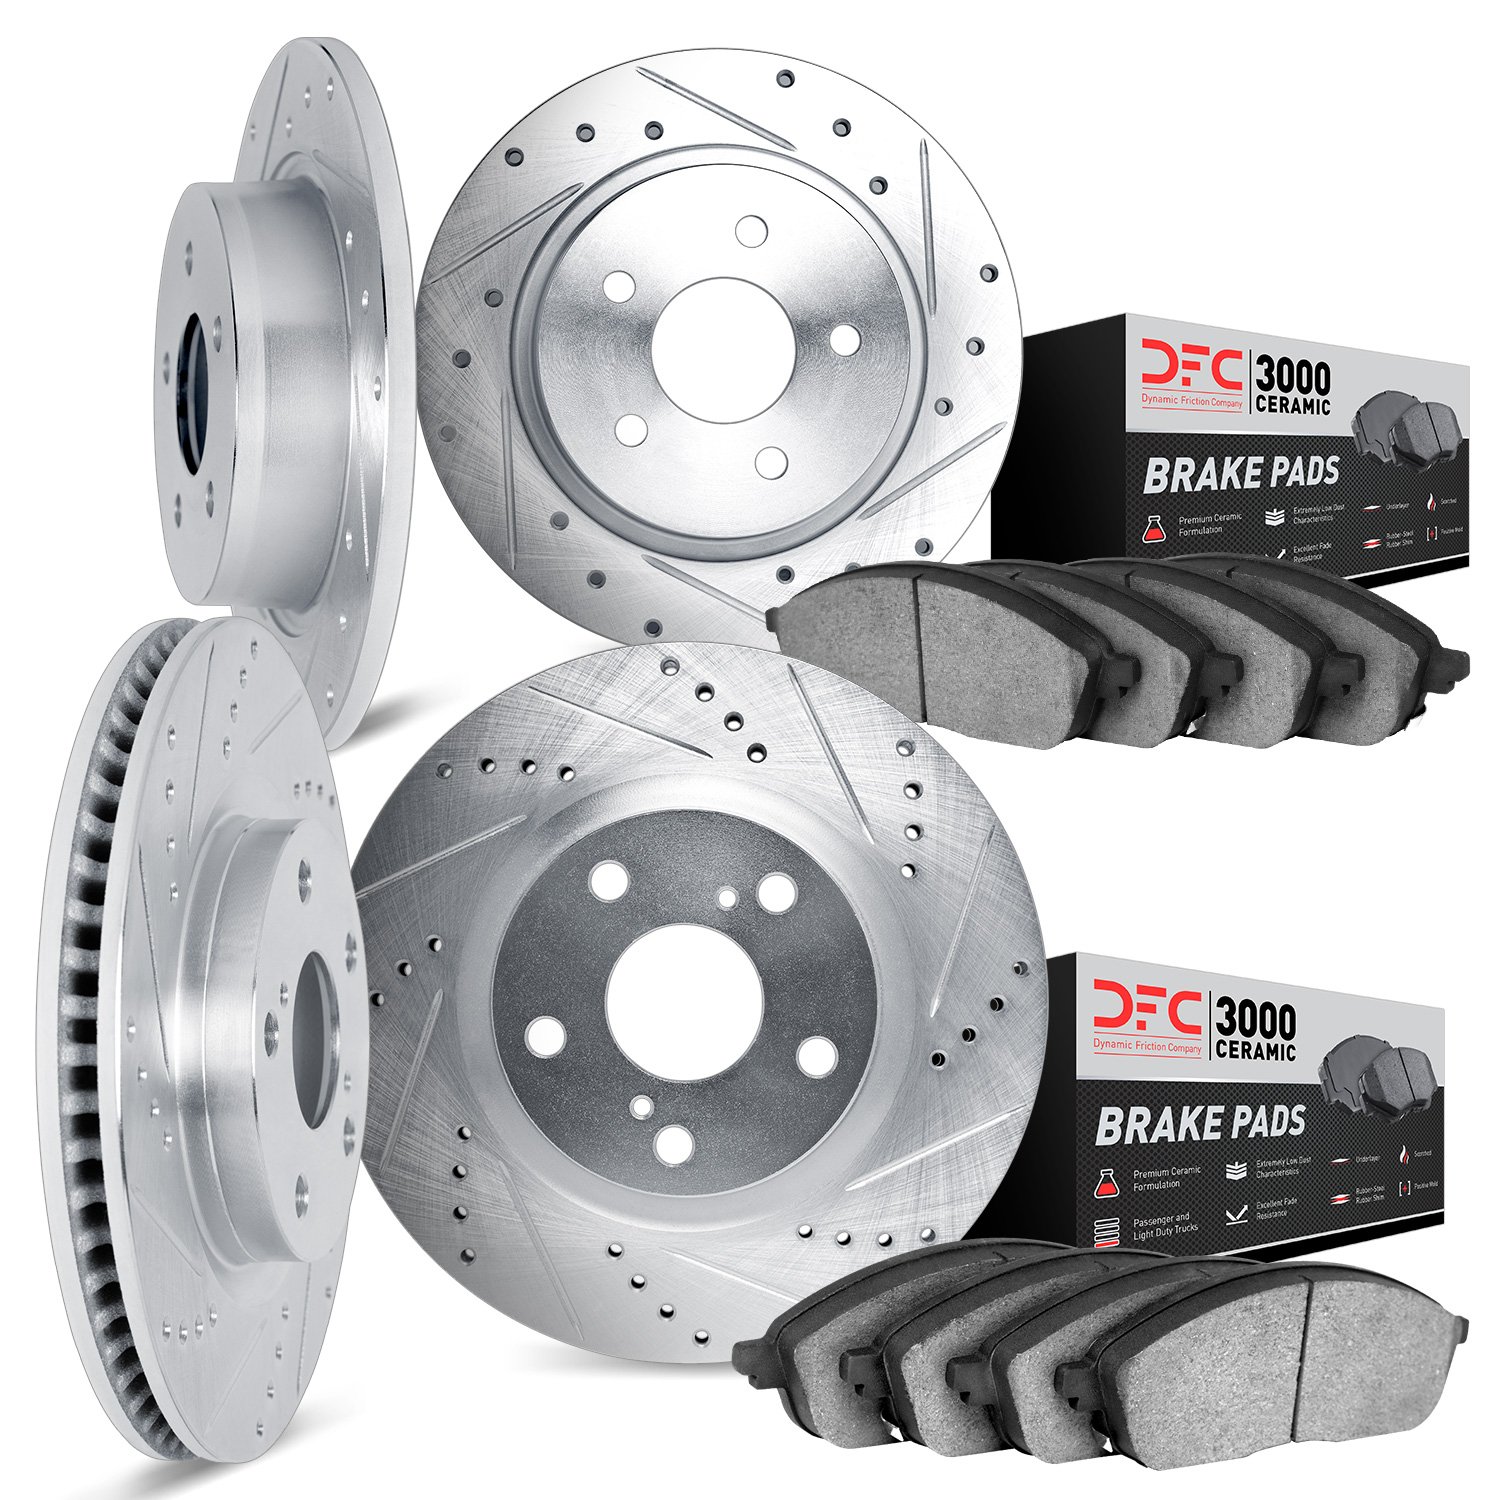 7304-54020 Drilled/Slotted Brake Rotor with 3000-Series Ceramic Brake Pads Kit [Silver], 1995-2005 Ford/Lincoln/Mercury/Mazda, P